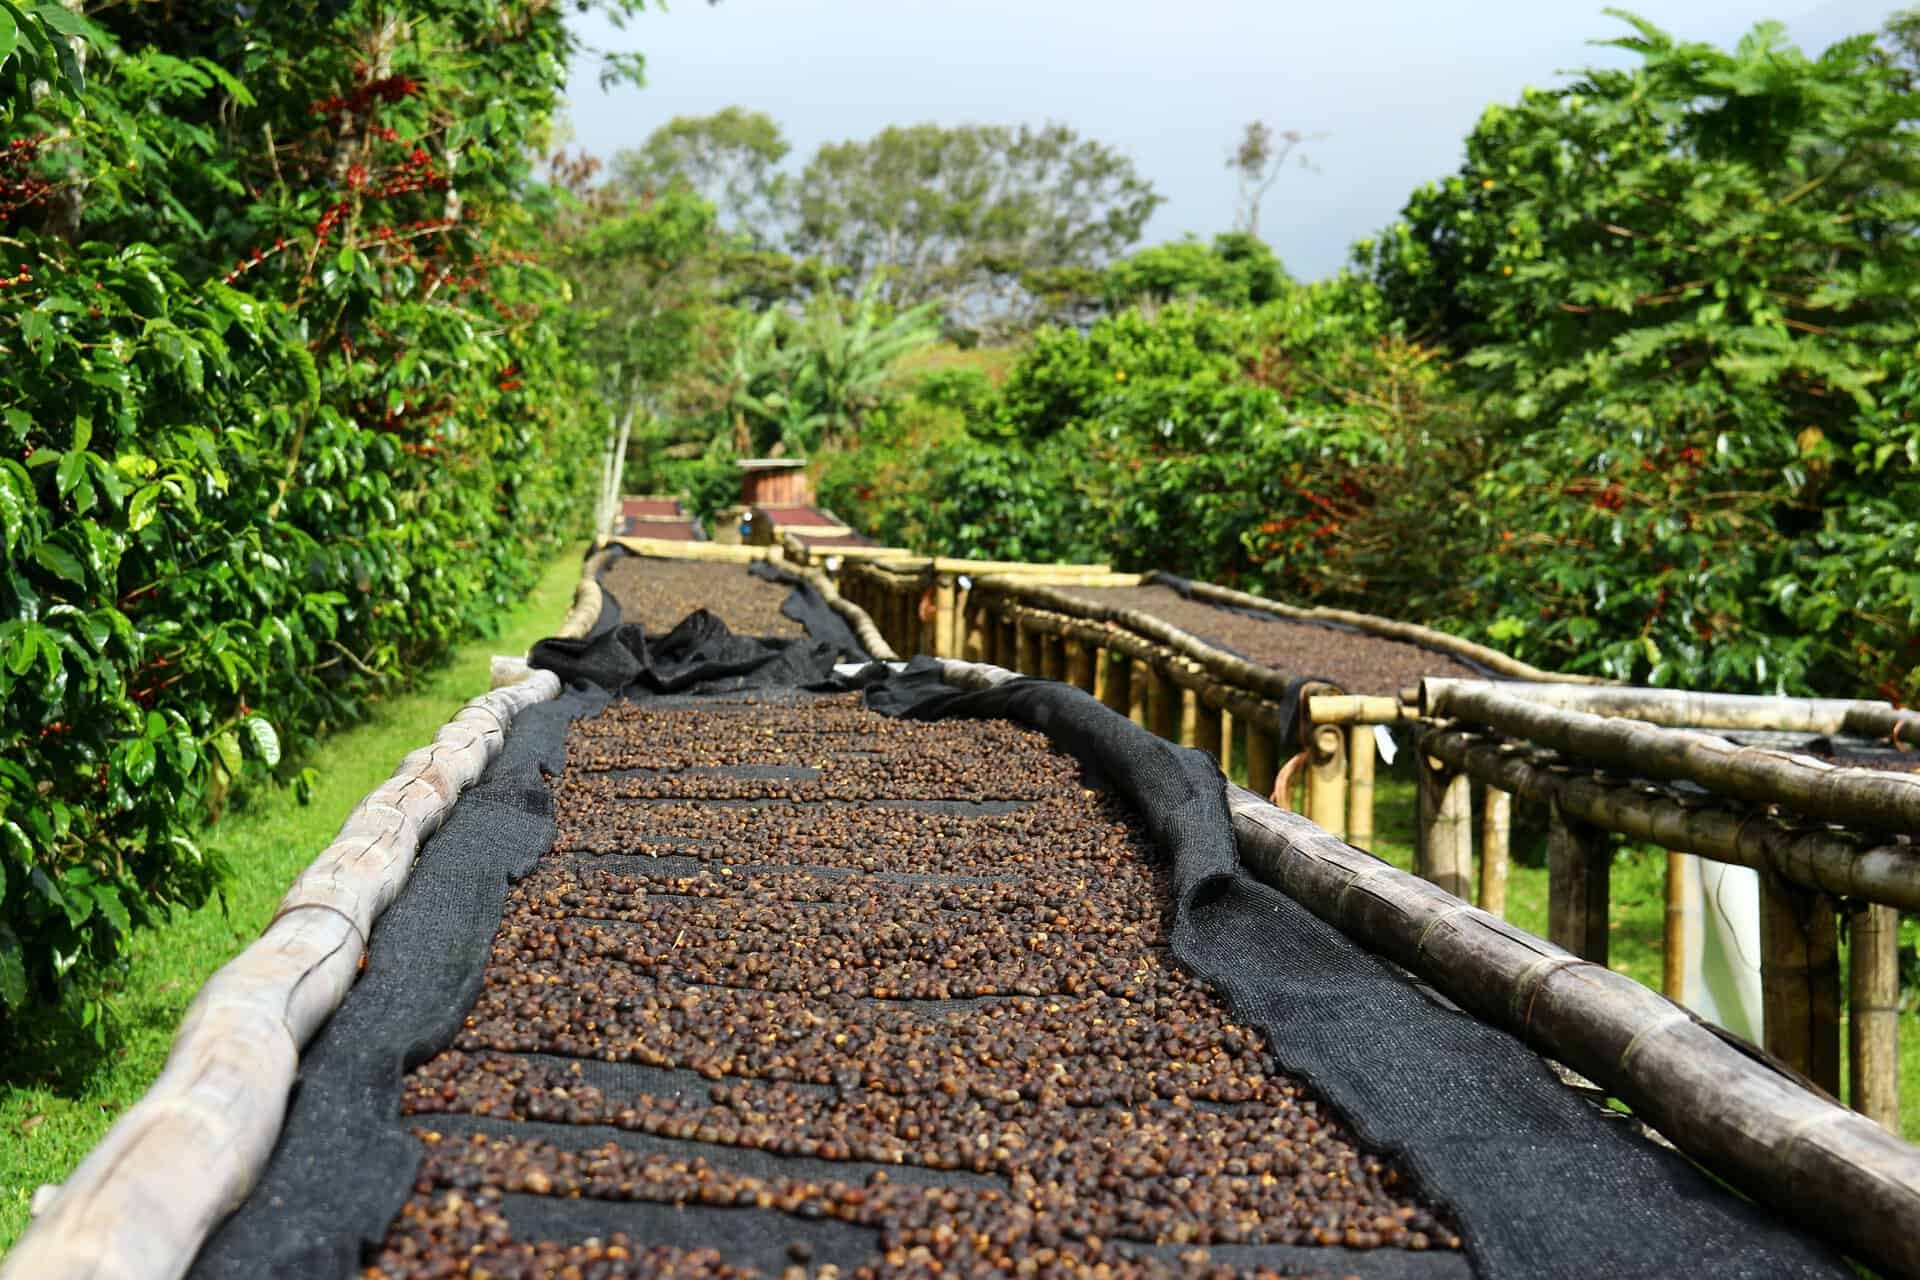 Coffee cherries lying to dry on bamboo raised beds in Boquete, Panama 2/3